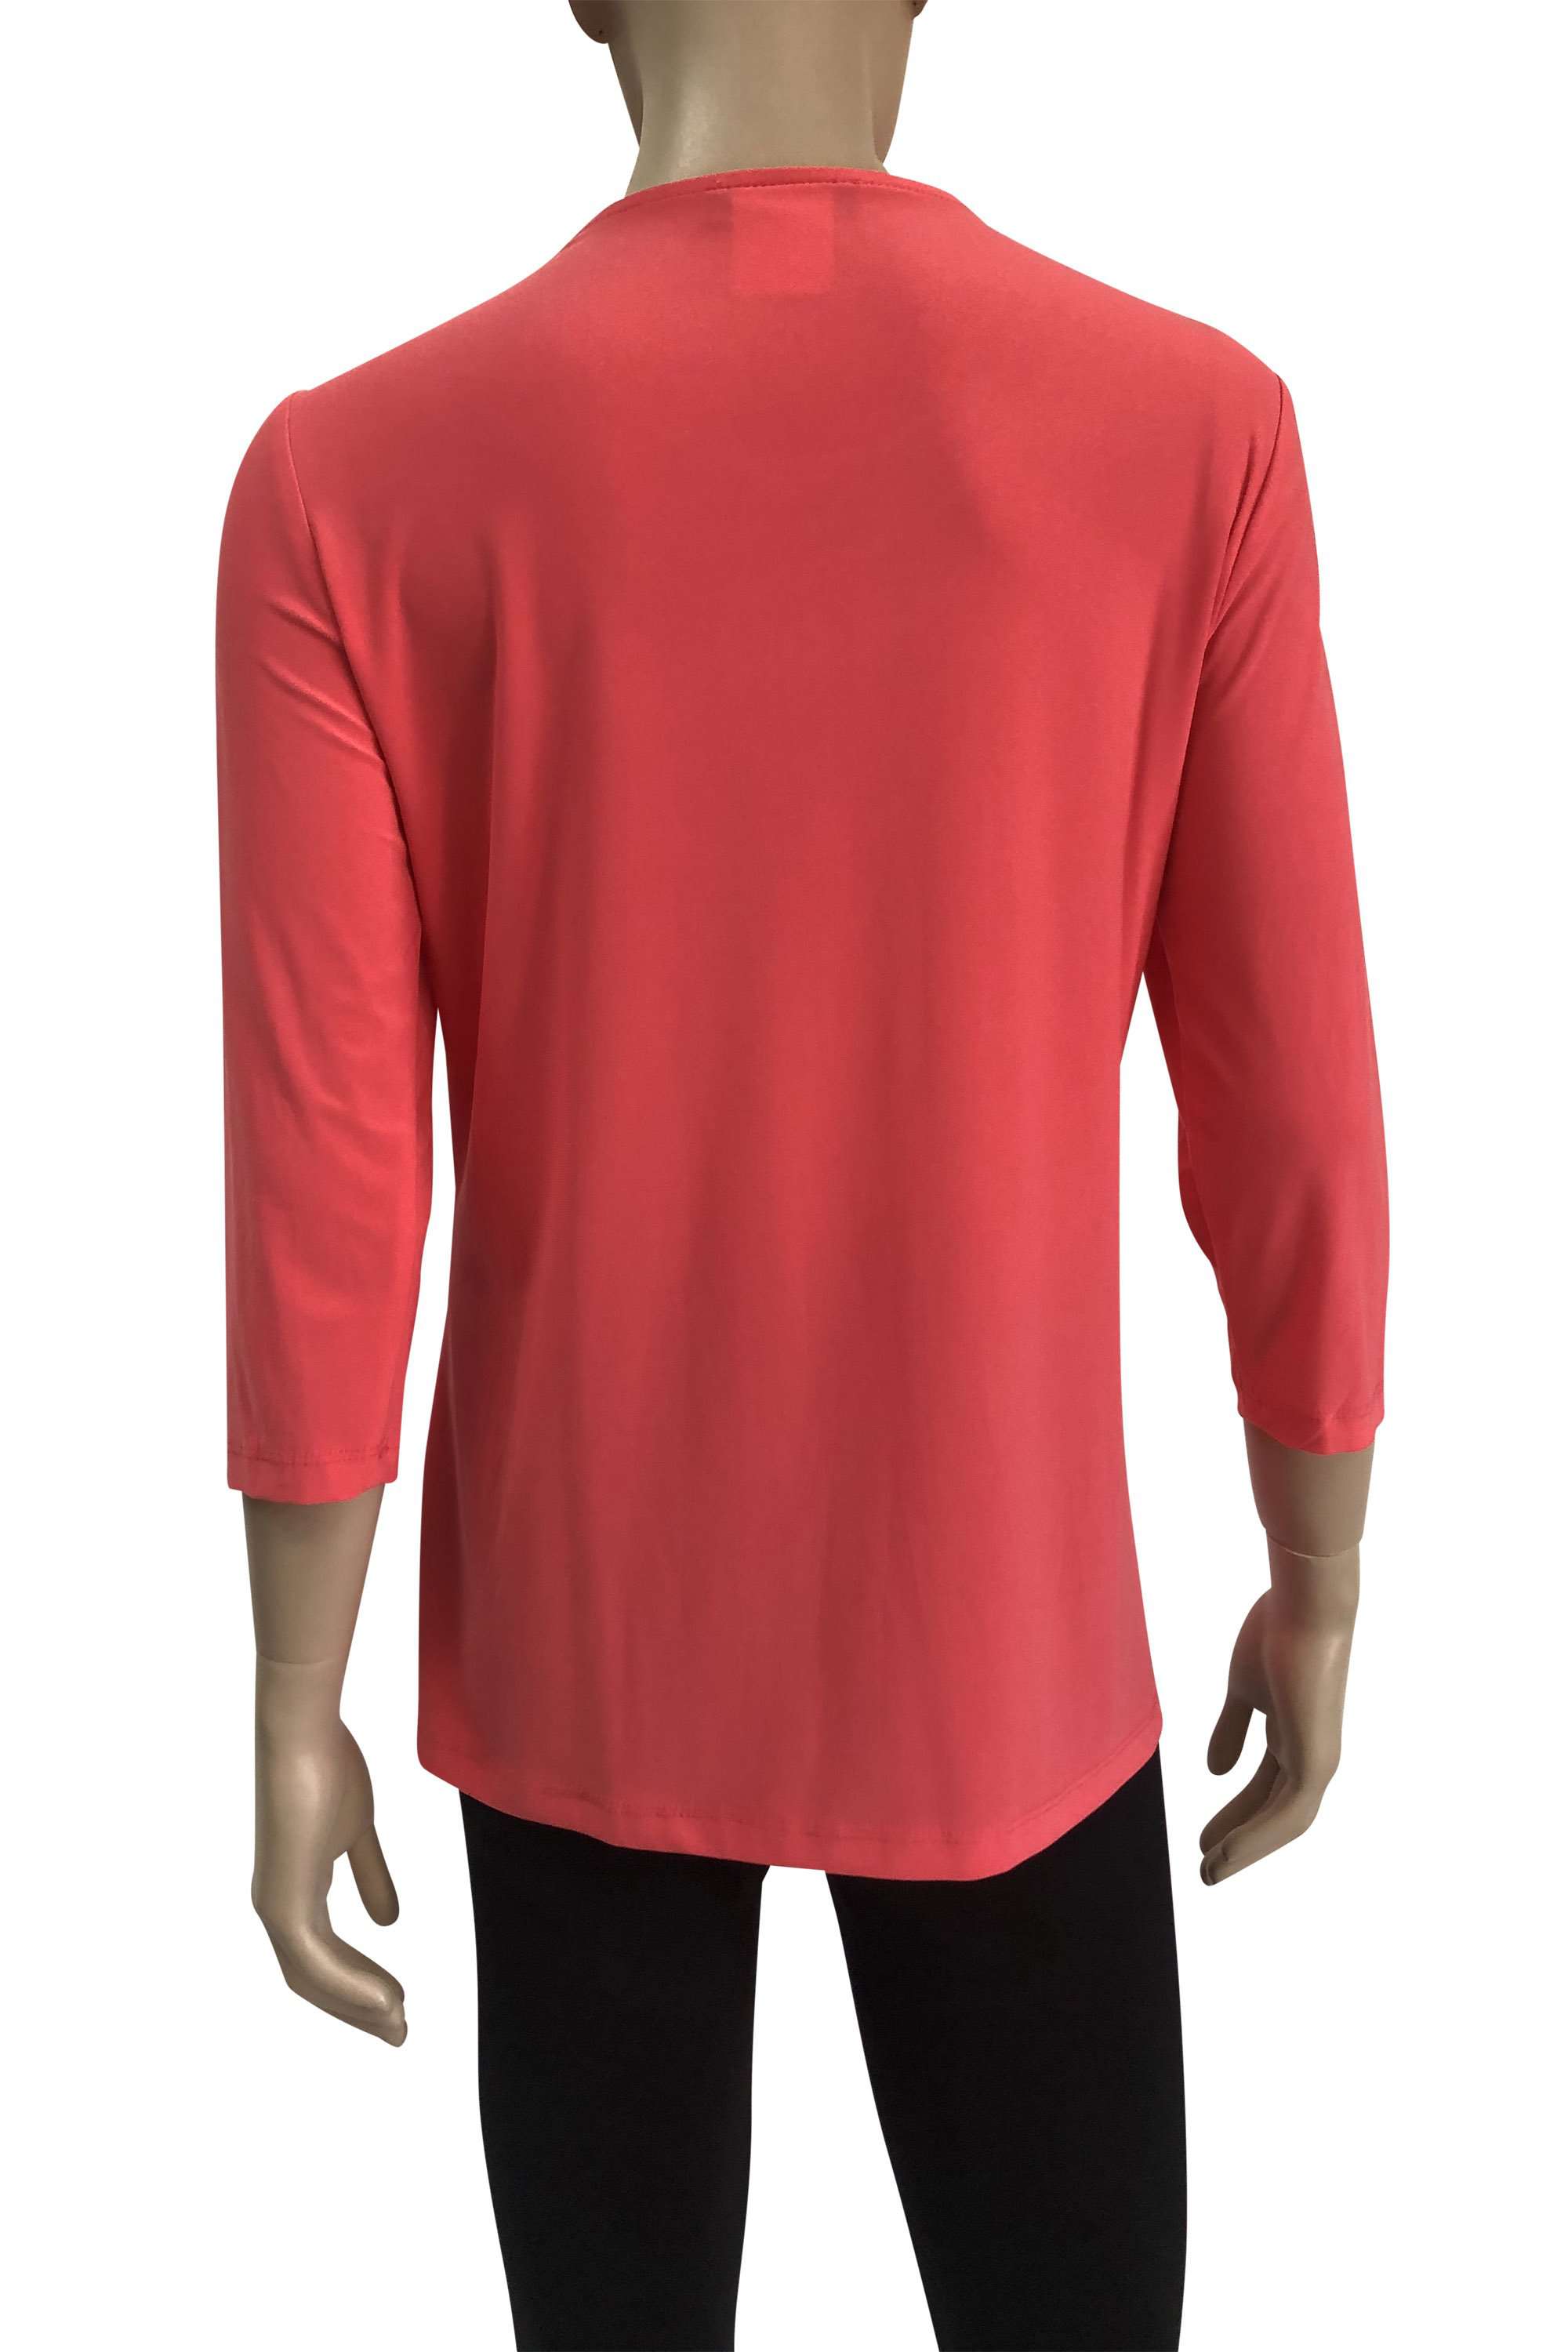 Women's Top Coral Stunning Design Flattering Fit Made in Canada - Yvonne Marie - Yvonne Marie